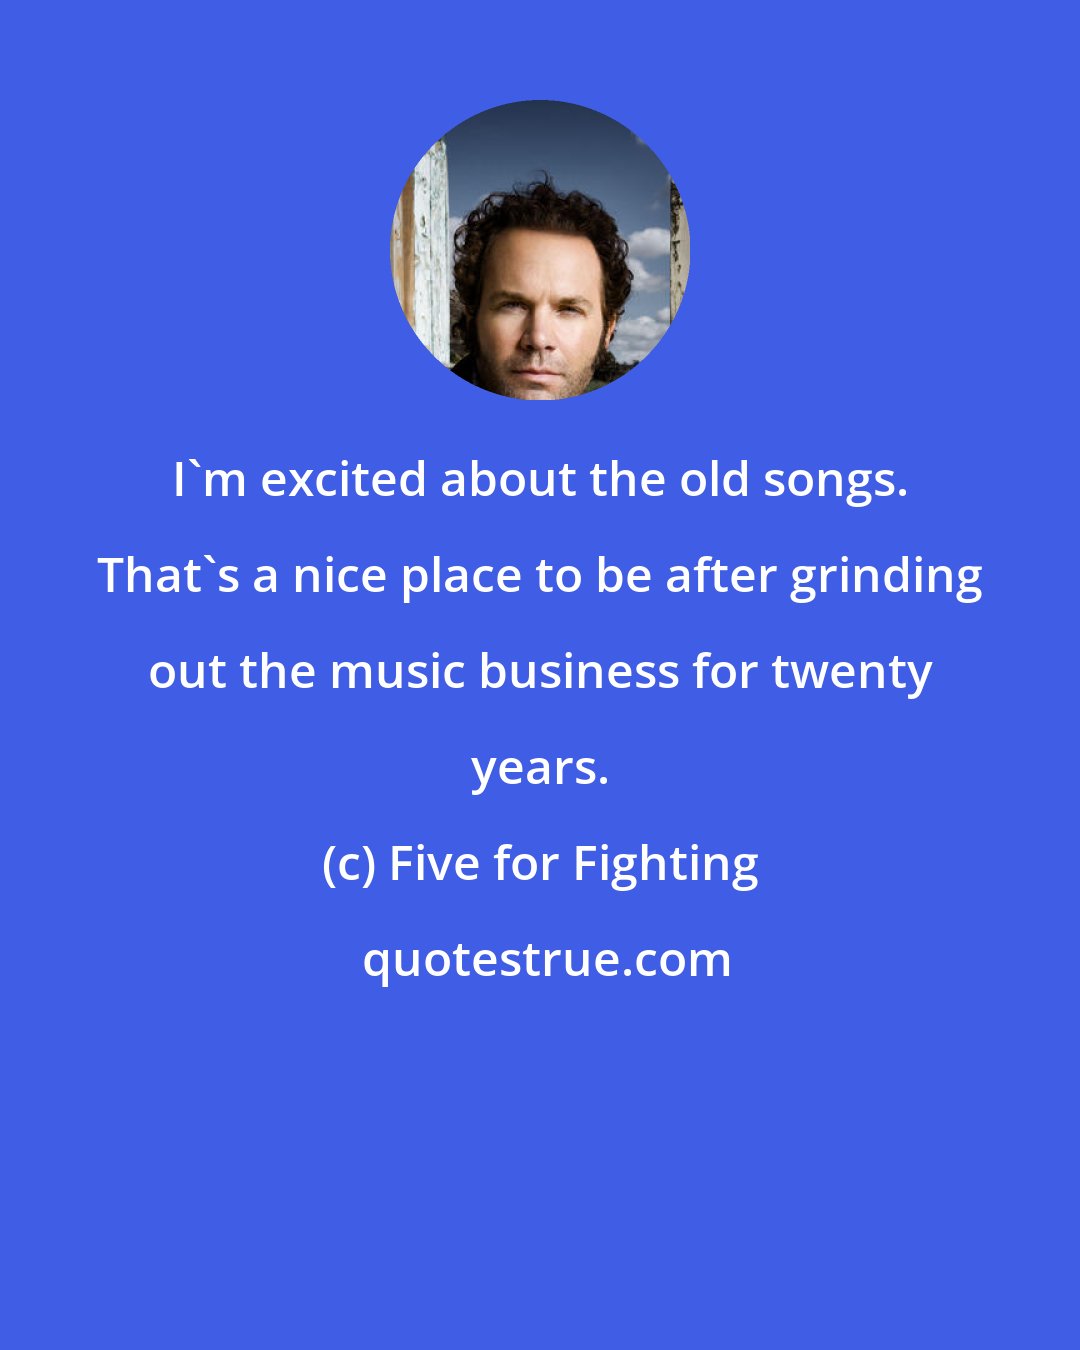 Five for Fighting: I'm excited about the old songs. That's a nice place to be after grinding out the music business for twenty years.